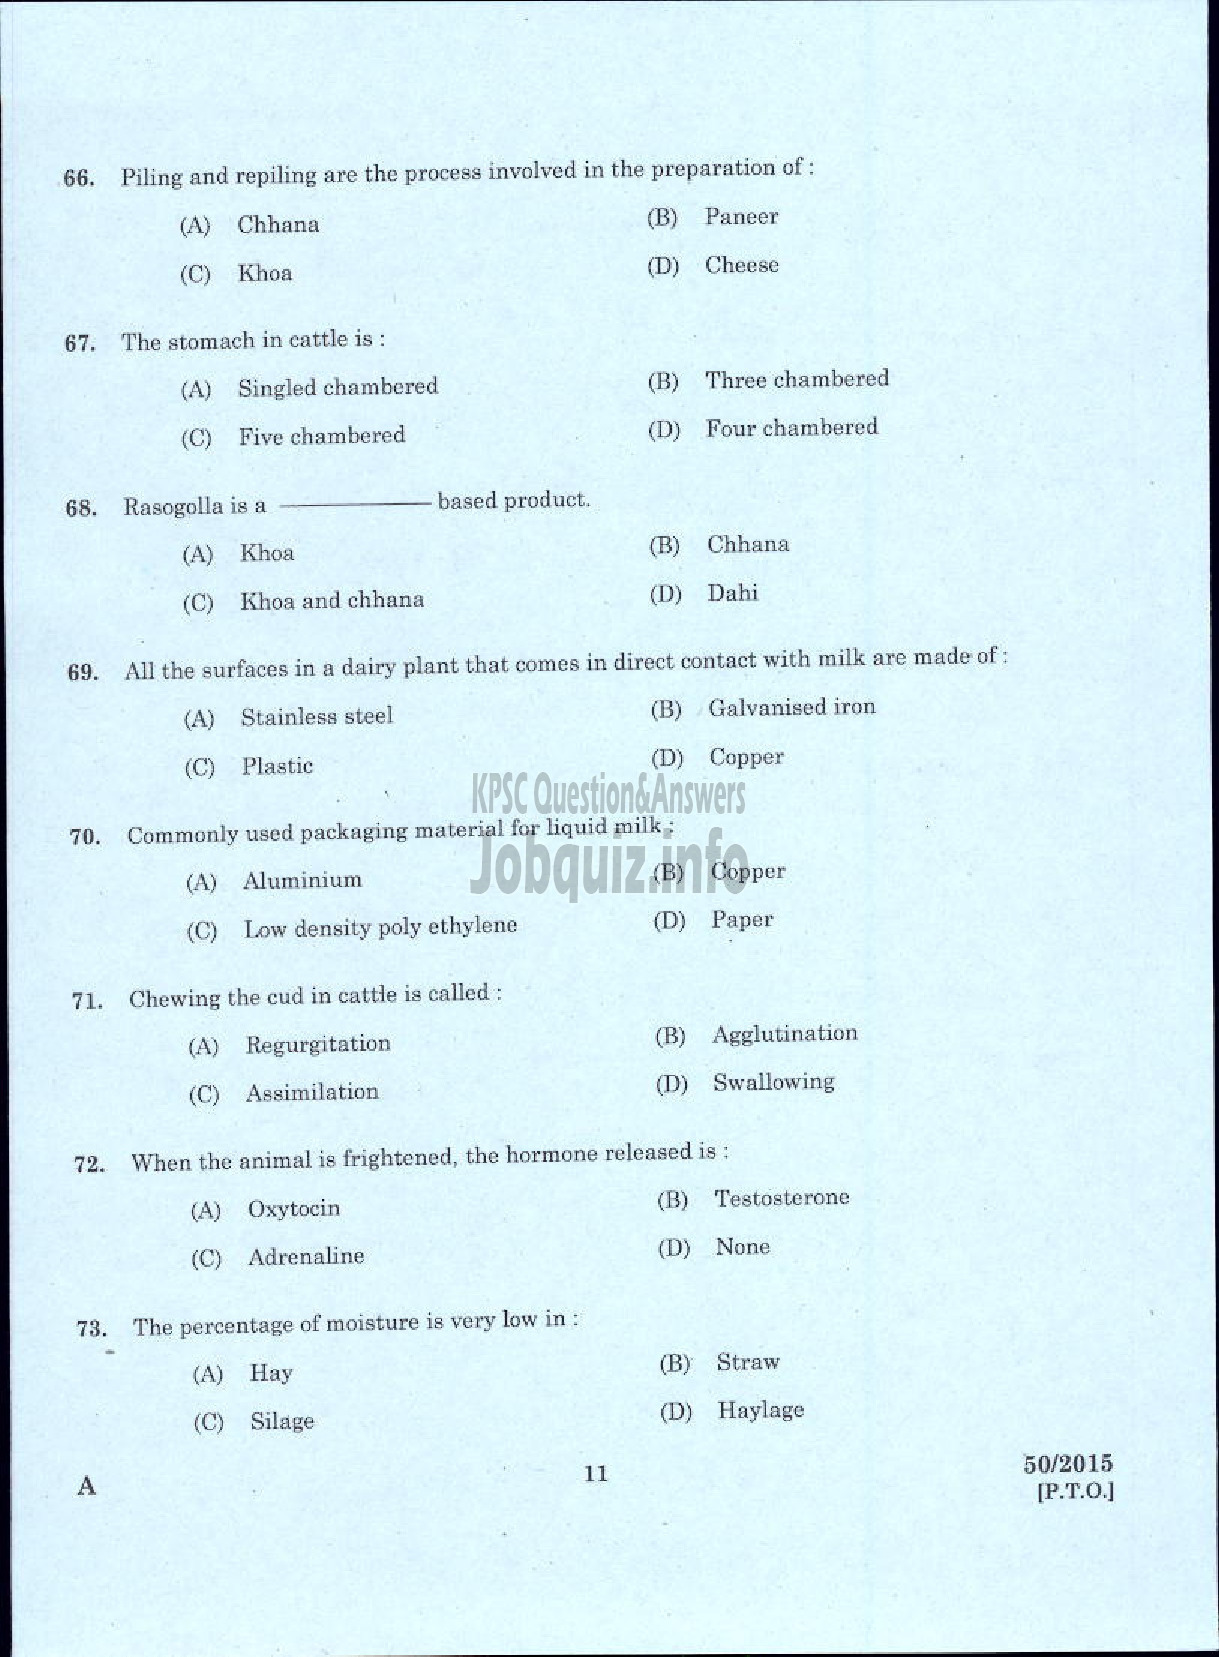 Kerala PSC Question Paper - LABORATORY TECHNICAL ASSISTANT DAIRYING AND MILK PRODUCTS VOCATIONAL HIGHER SECONDARY EDUCATION-9